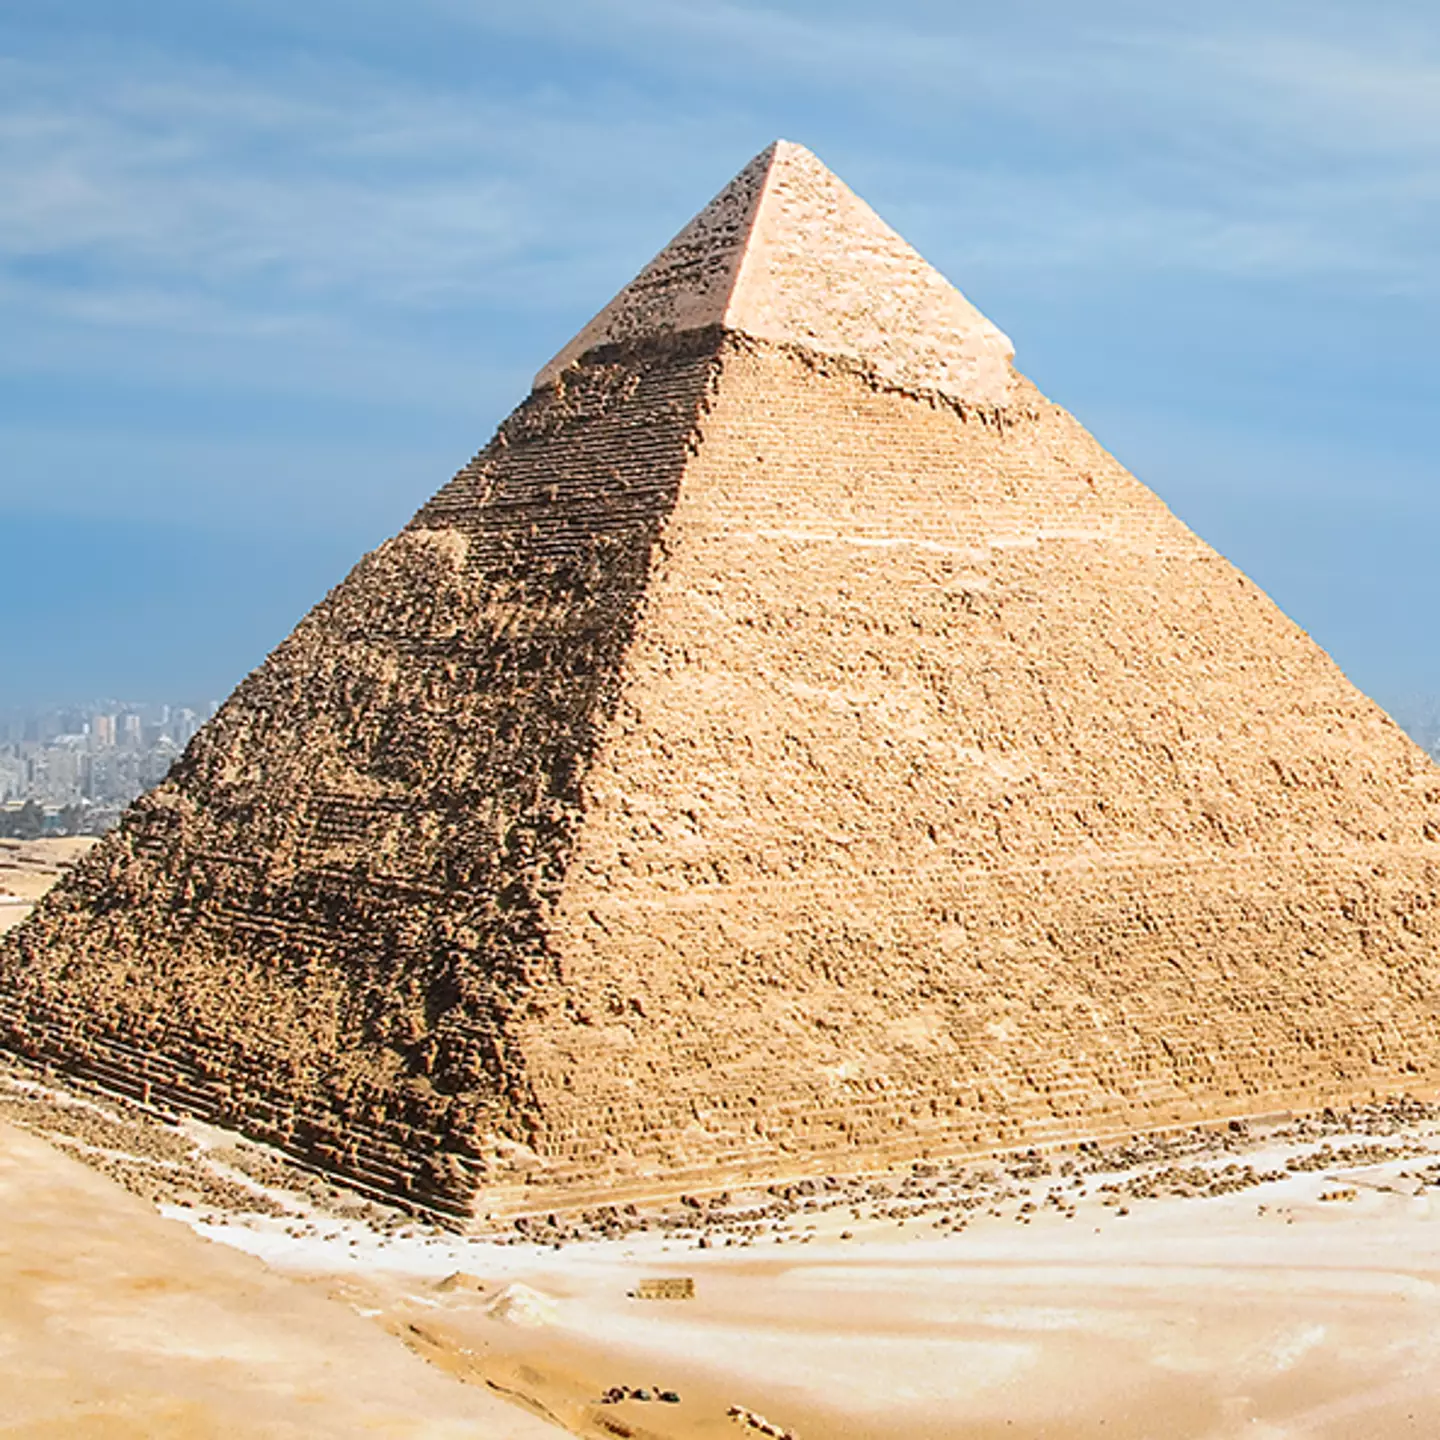 Man explores inside a pyramid in fascinating footage that’s triggering a new fear for viewers